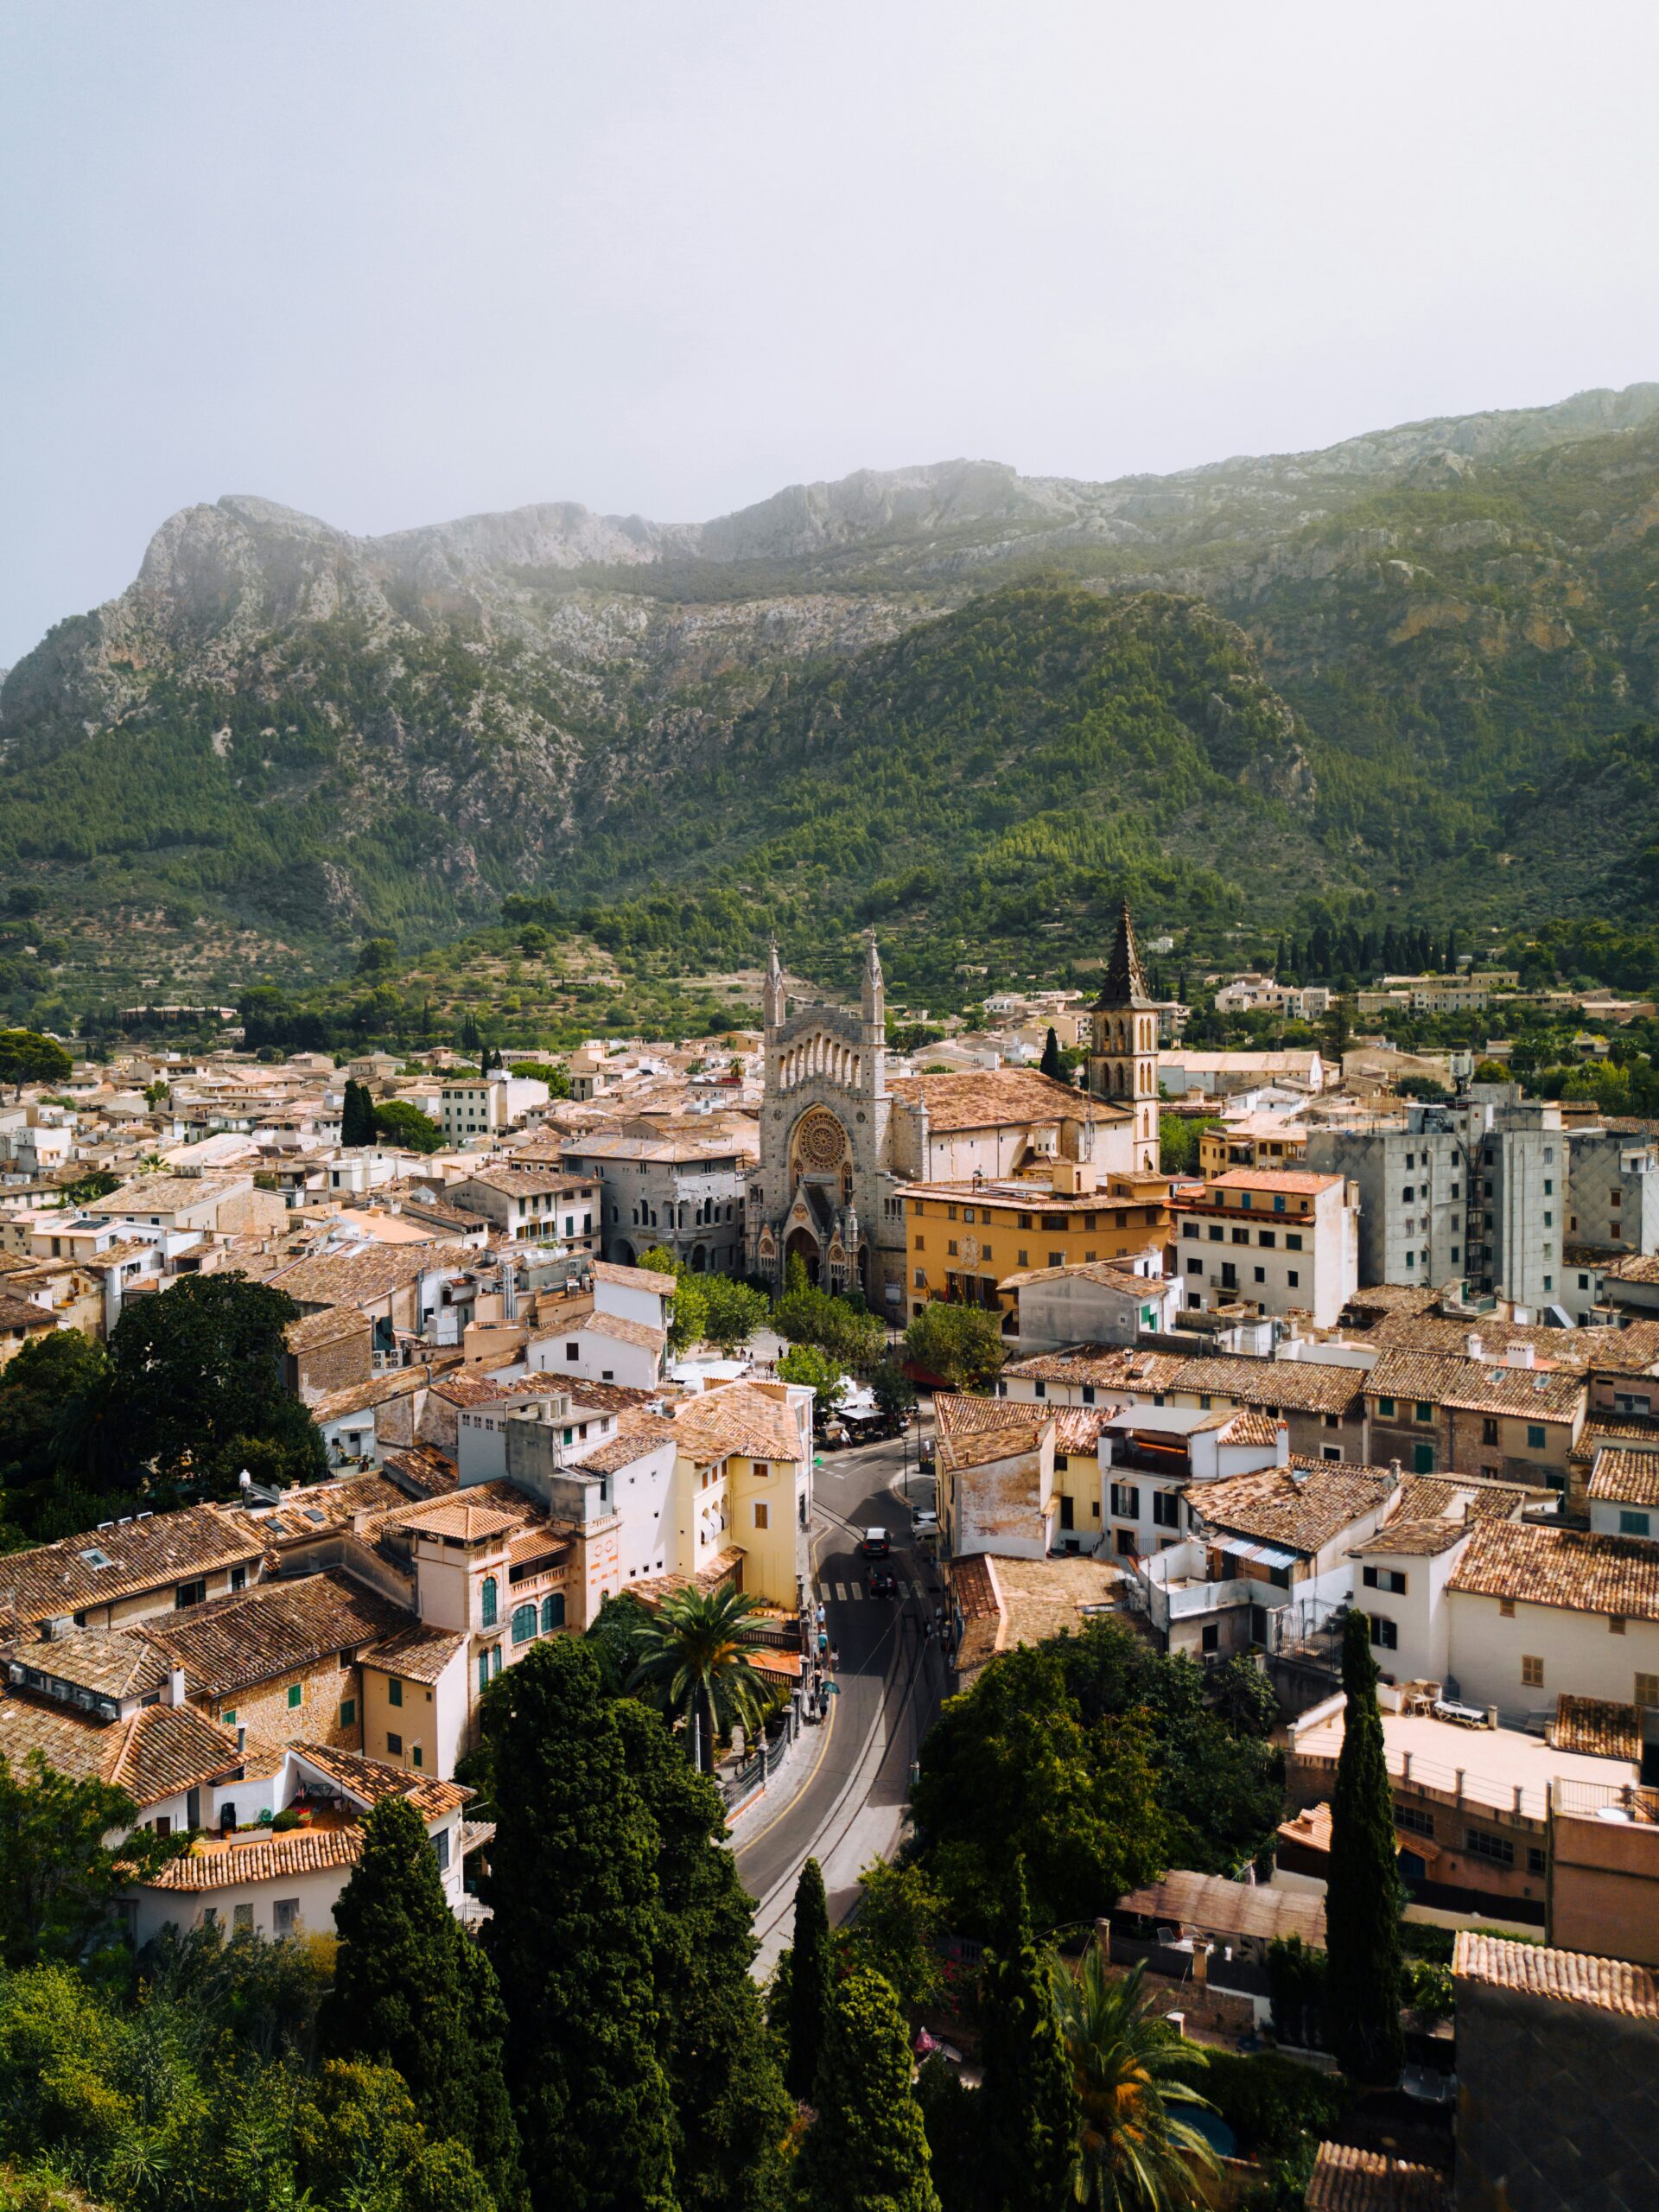 Sóller Village: The Most Charming Day Trip from Palma de Mallorca